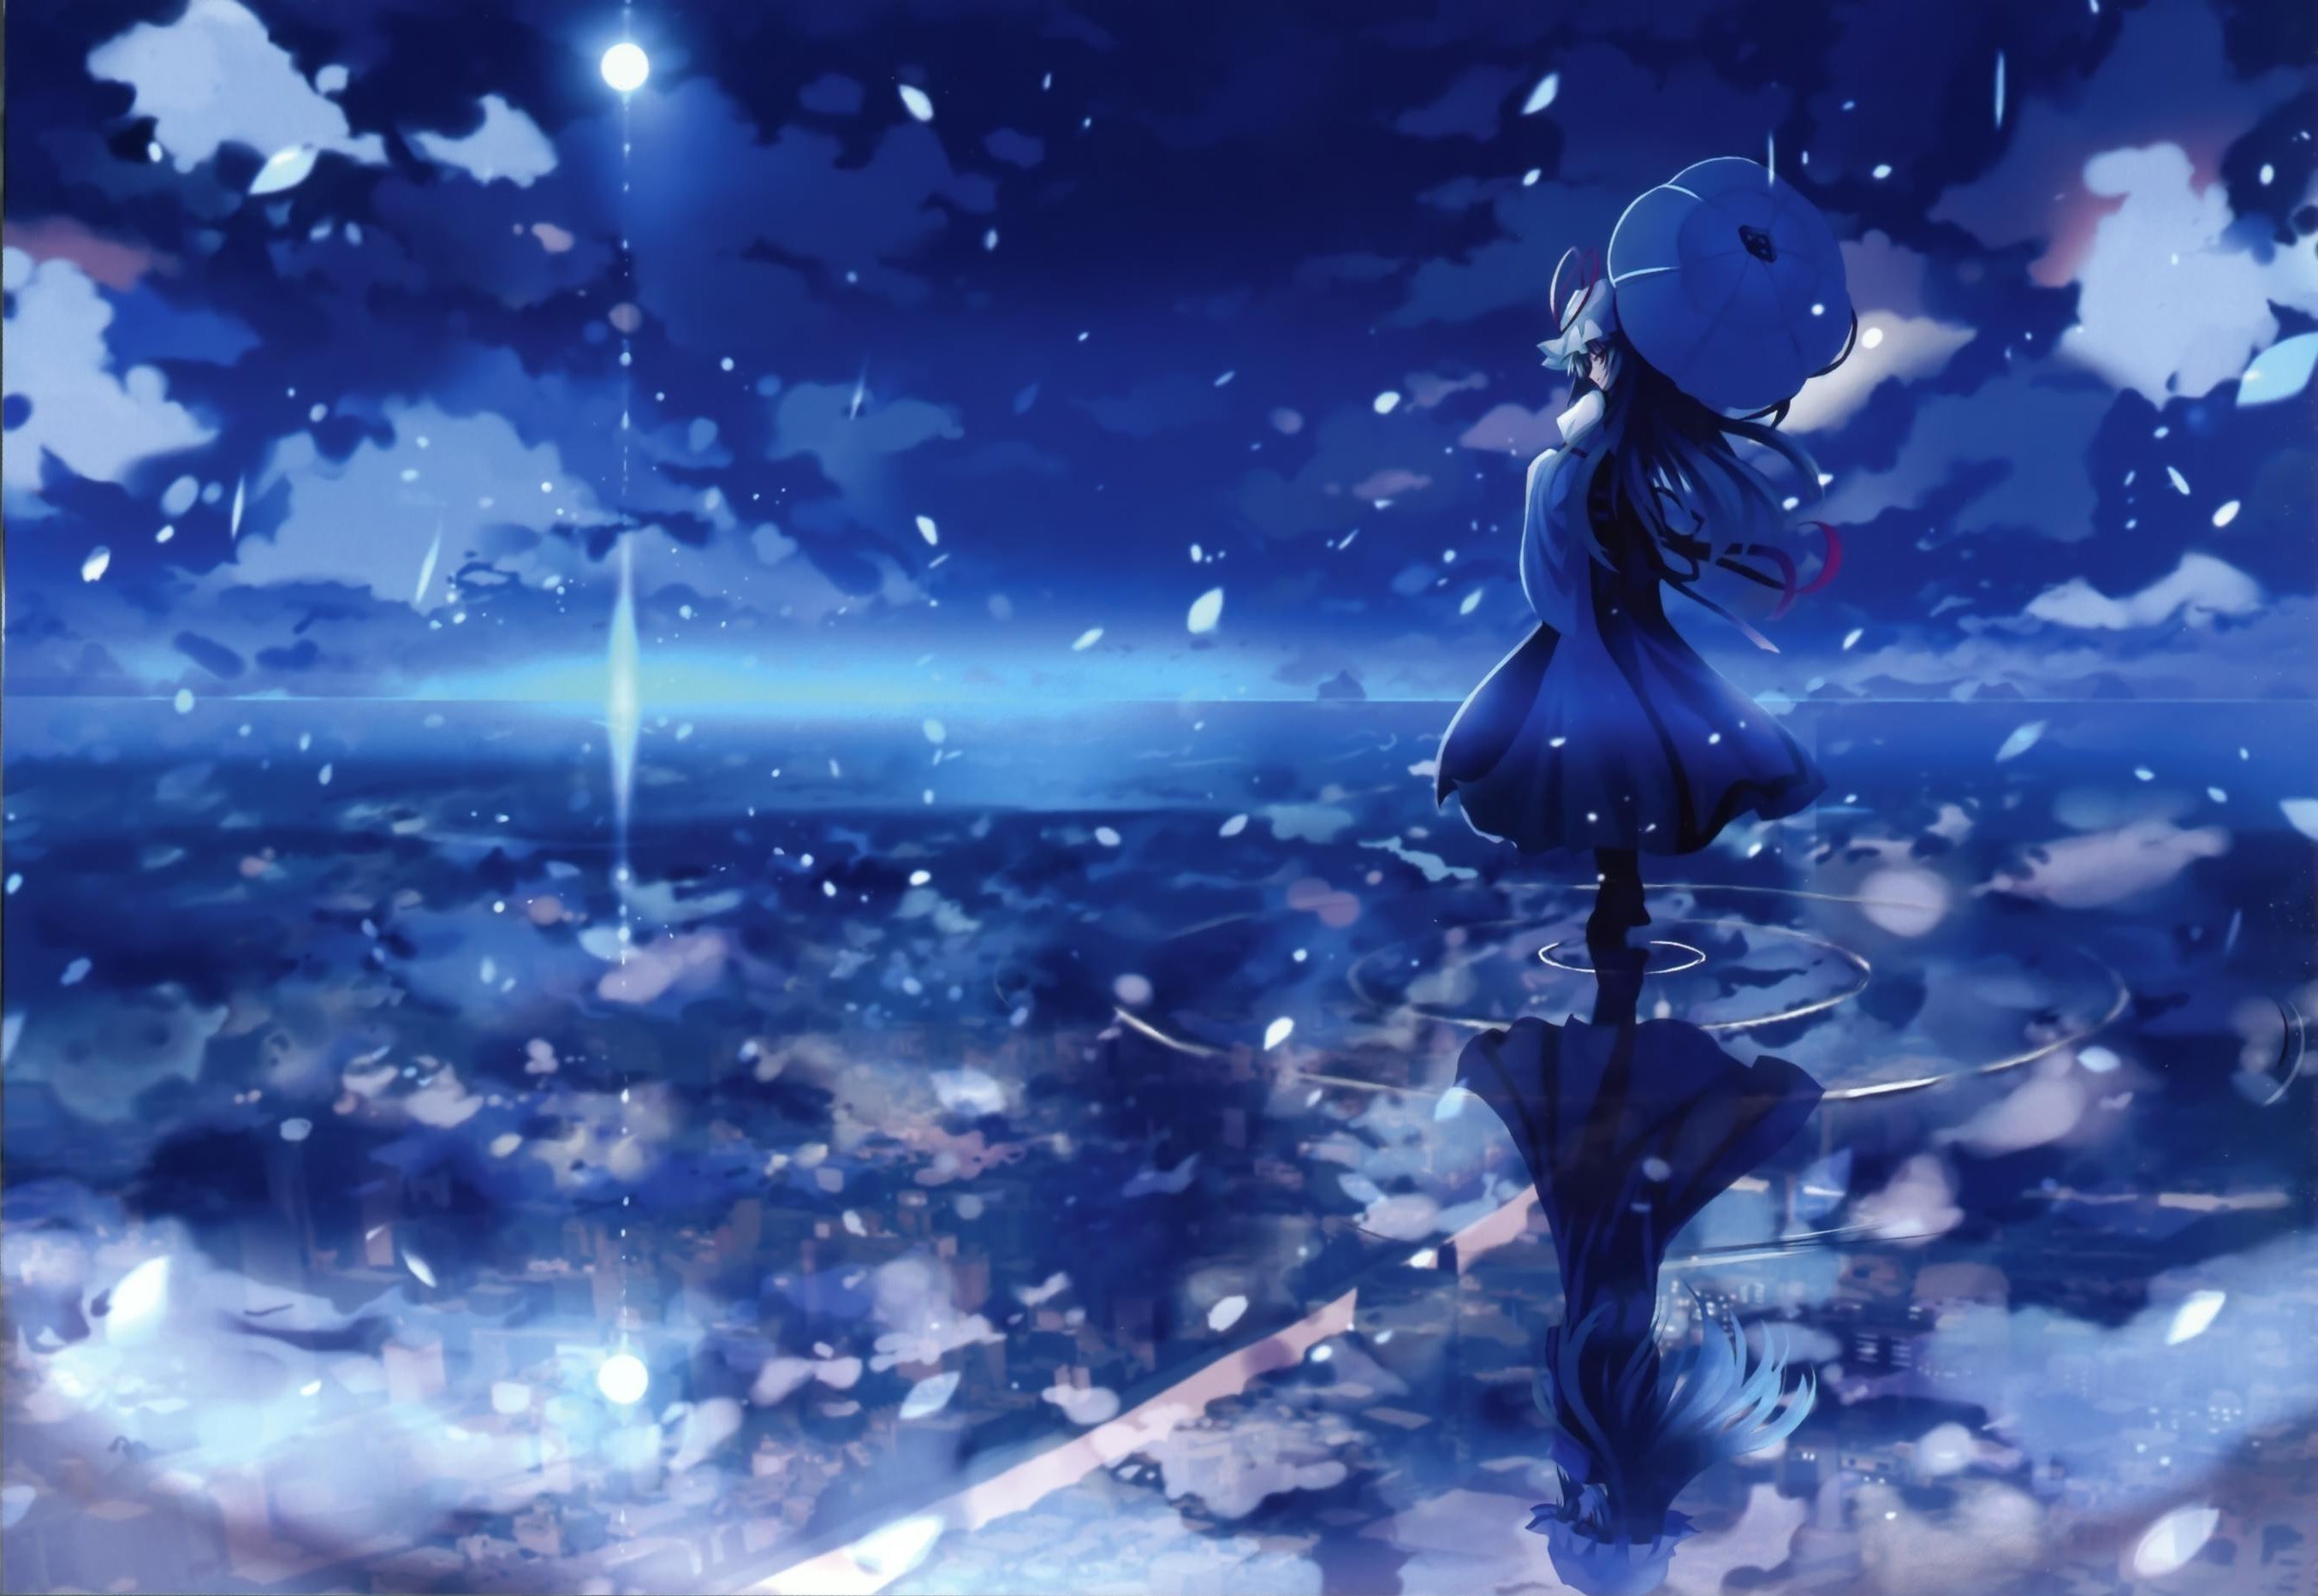 Water Blue Touhou Night Scenic Yakumo Yukari Umbrellas Skyscapes Reflections Anime Girls Wallpapers Hd Desktop And Mobile Backgrounds